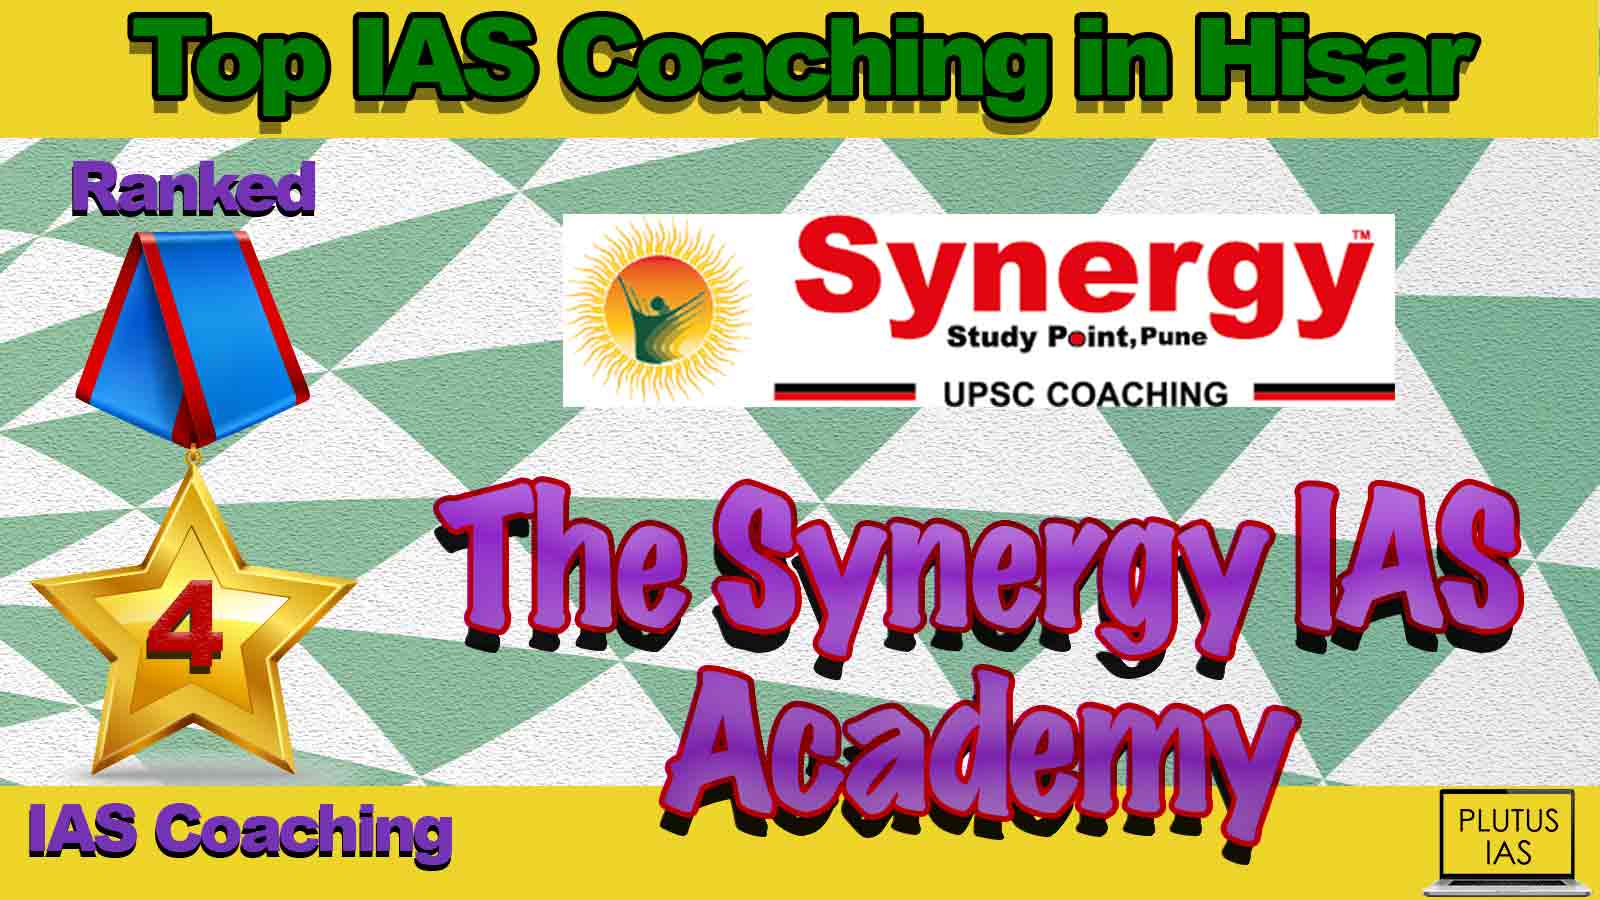 Best IAS Coaching in hisar